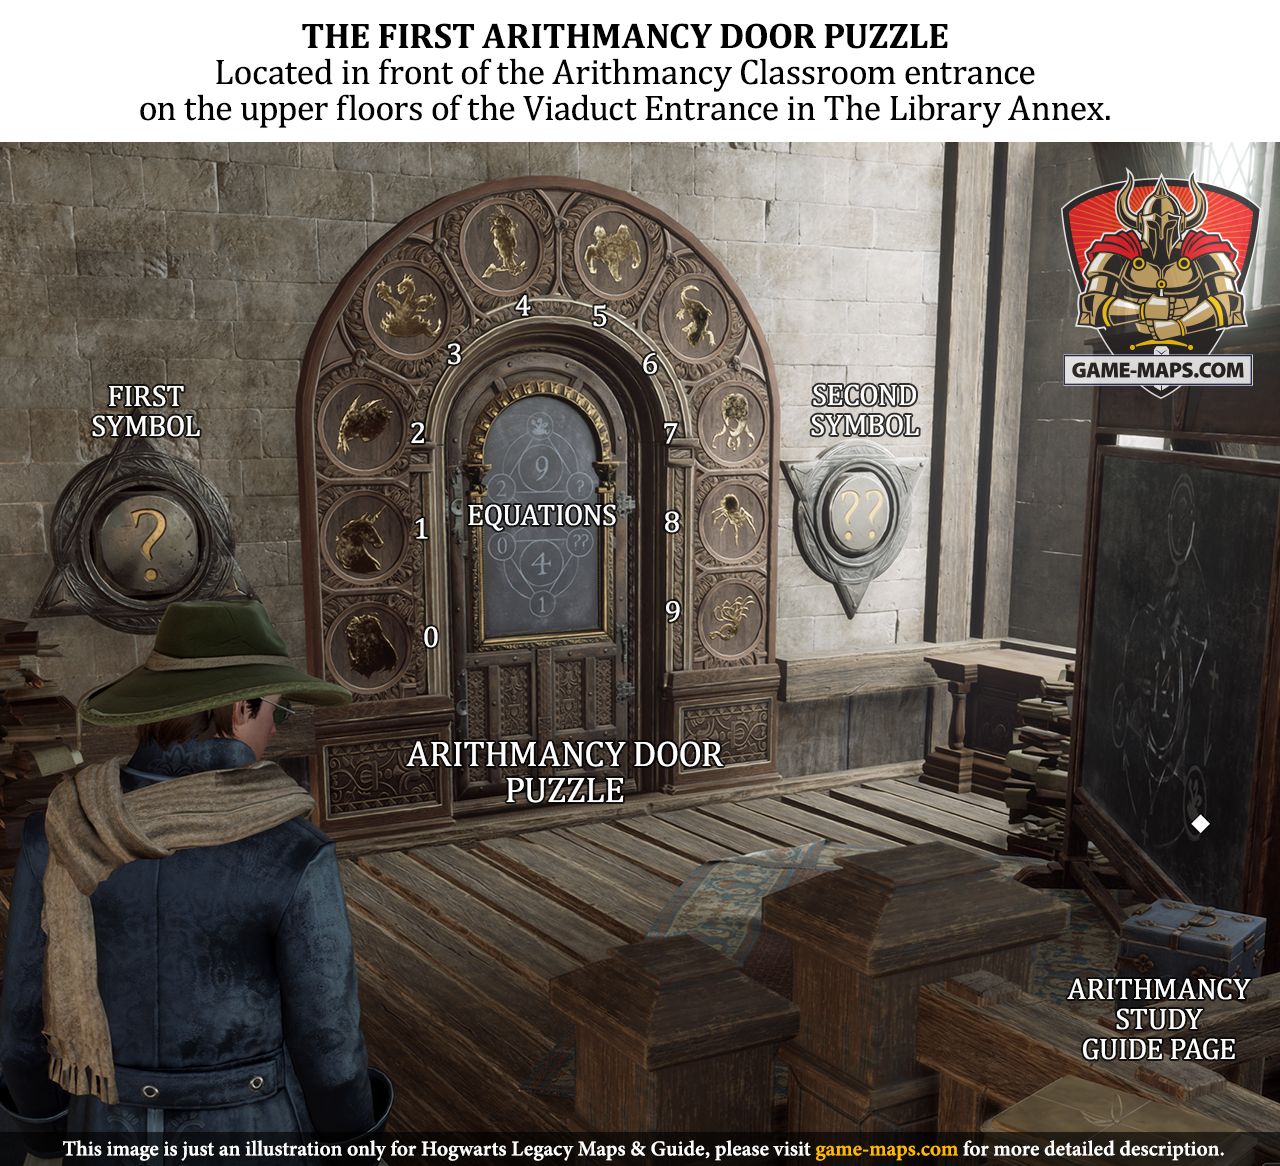 The first Arithmancy Door Puzzle The first Arithmancy Door Puzzle located in front of the Arithmancy Classroom entrance on the upper floors of the Viaduct Entrance in The Library Annex. - Hogwarts Legacy